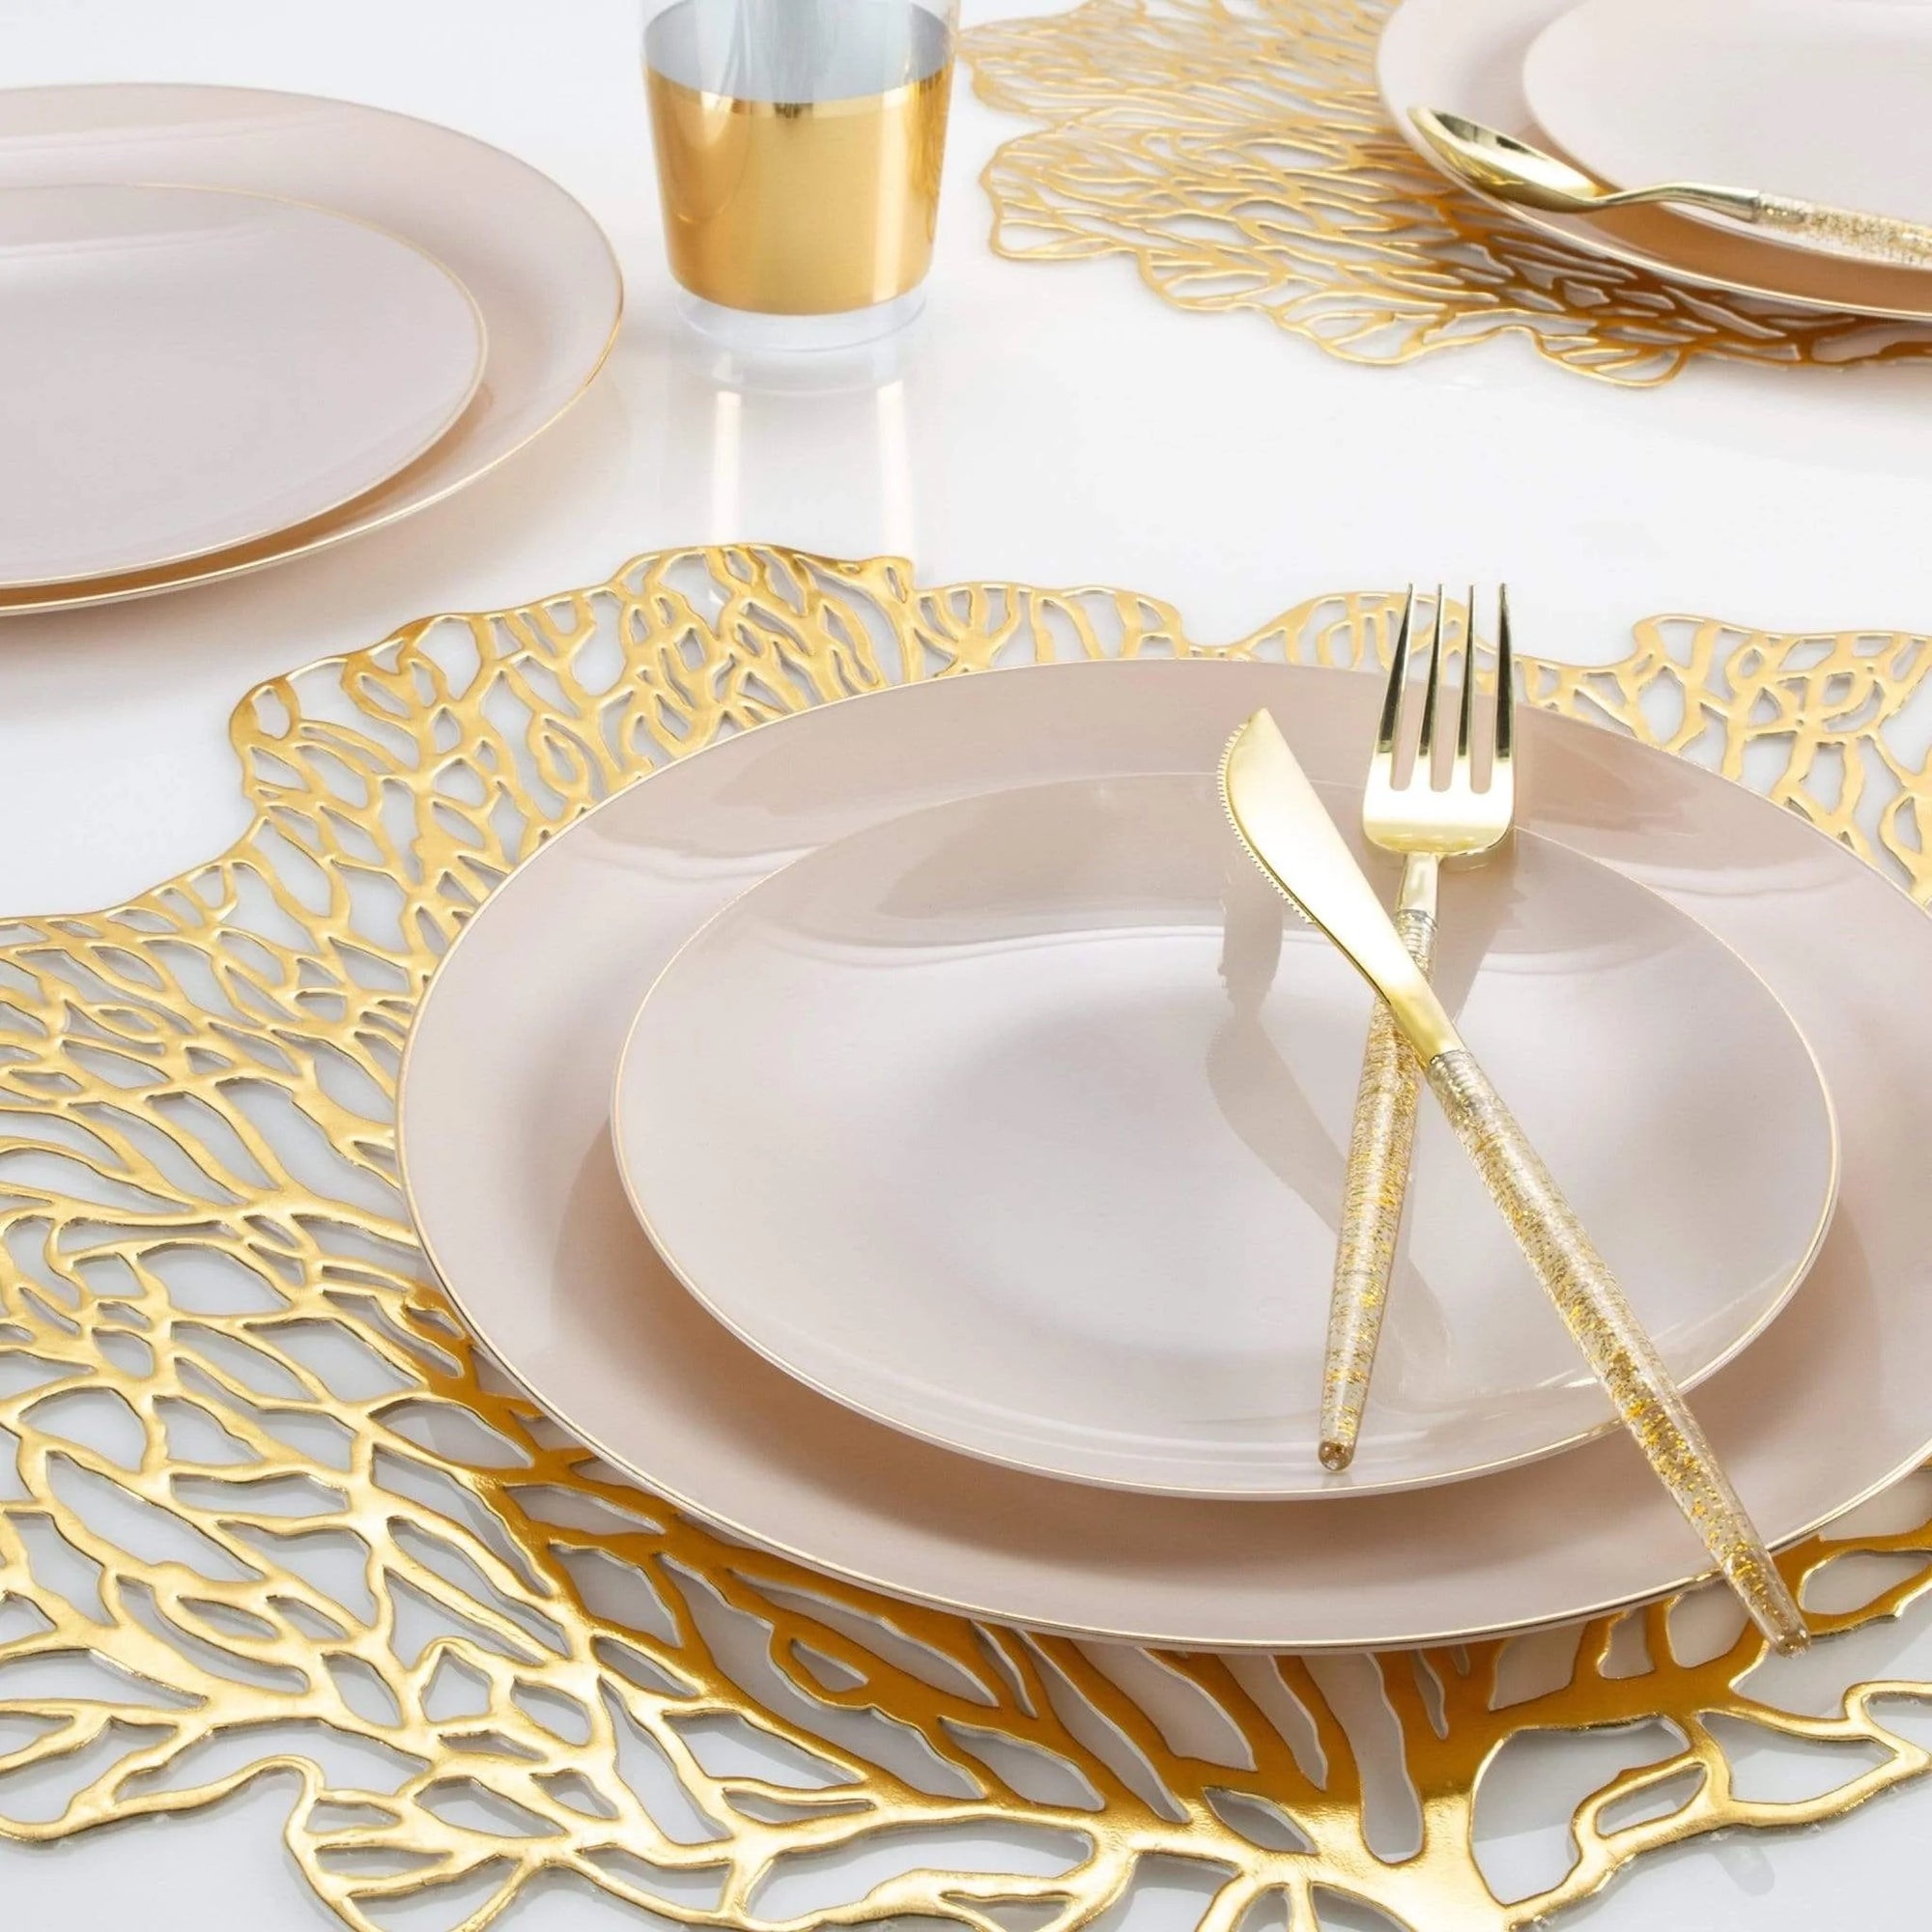 Linen Grey With Gold Rim Plastic Dessert Plates | The Party Darling